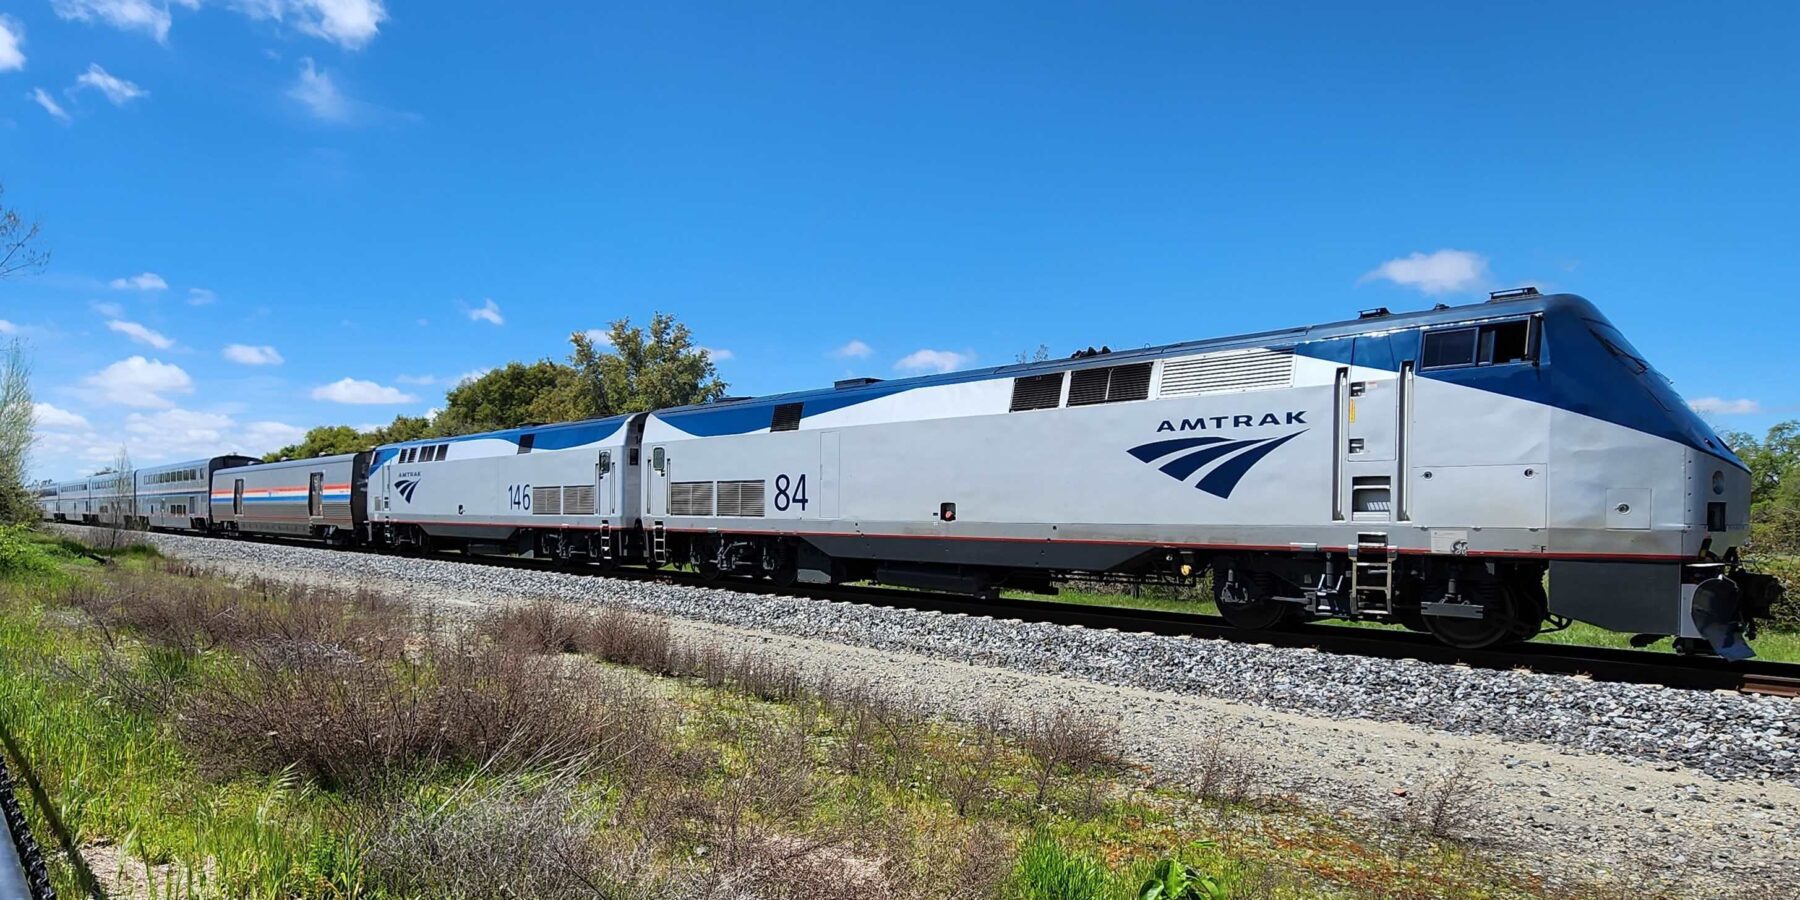 AMTRAK LOCOMOTIVES 84 AND 146 LEAD A AN EASTBOUND TRAIN IN LOOMIS CALIFORNIA.